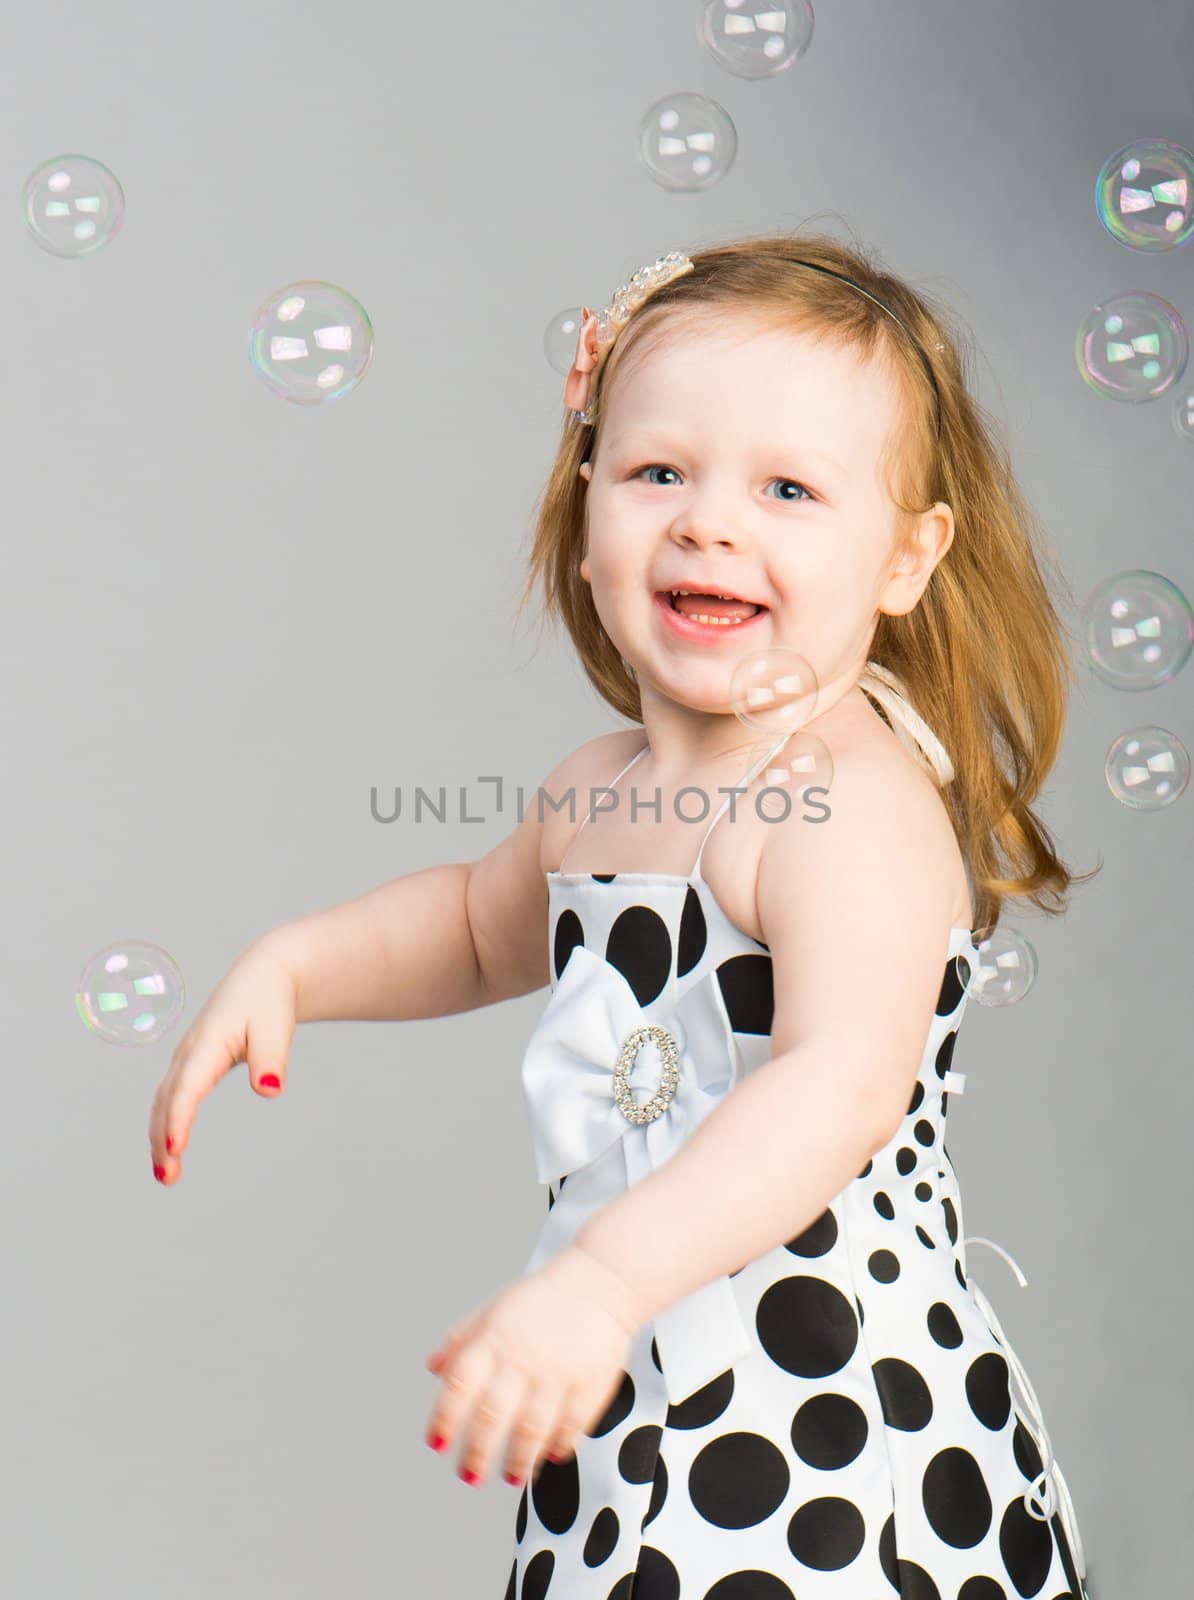 smilingl ittle girl with soap bubbles in studio